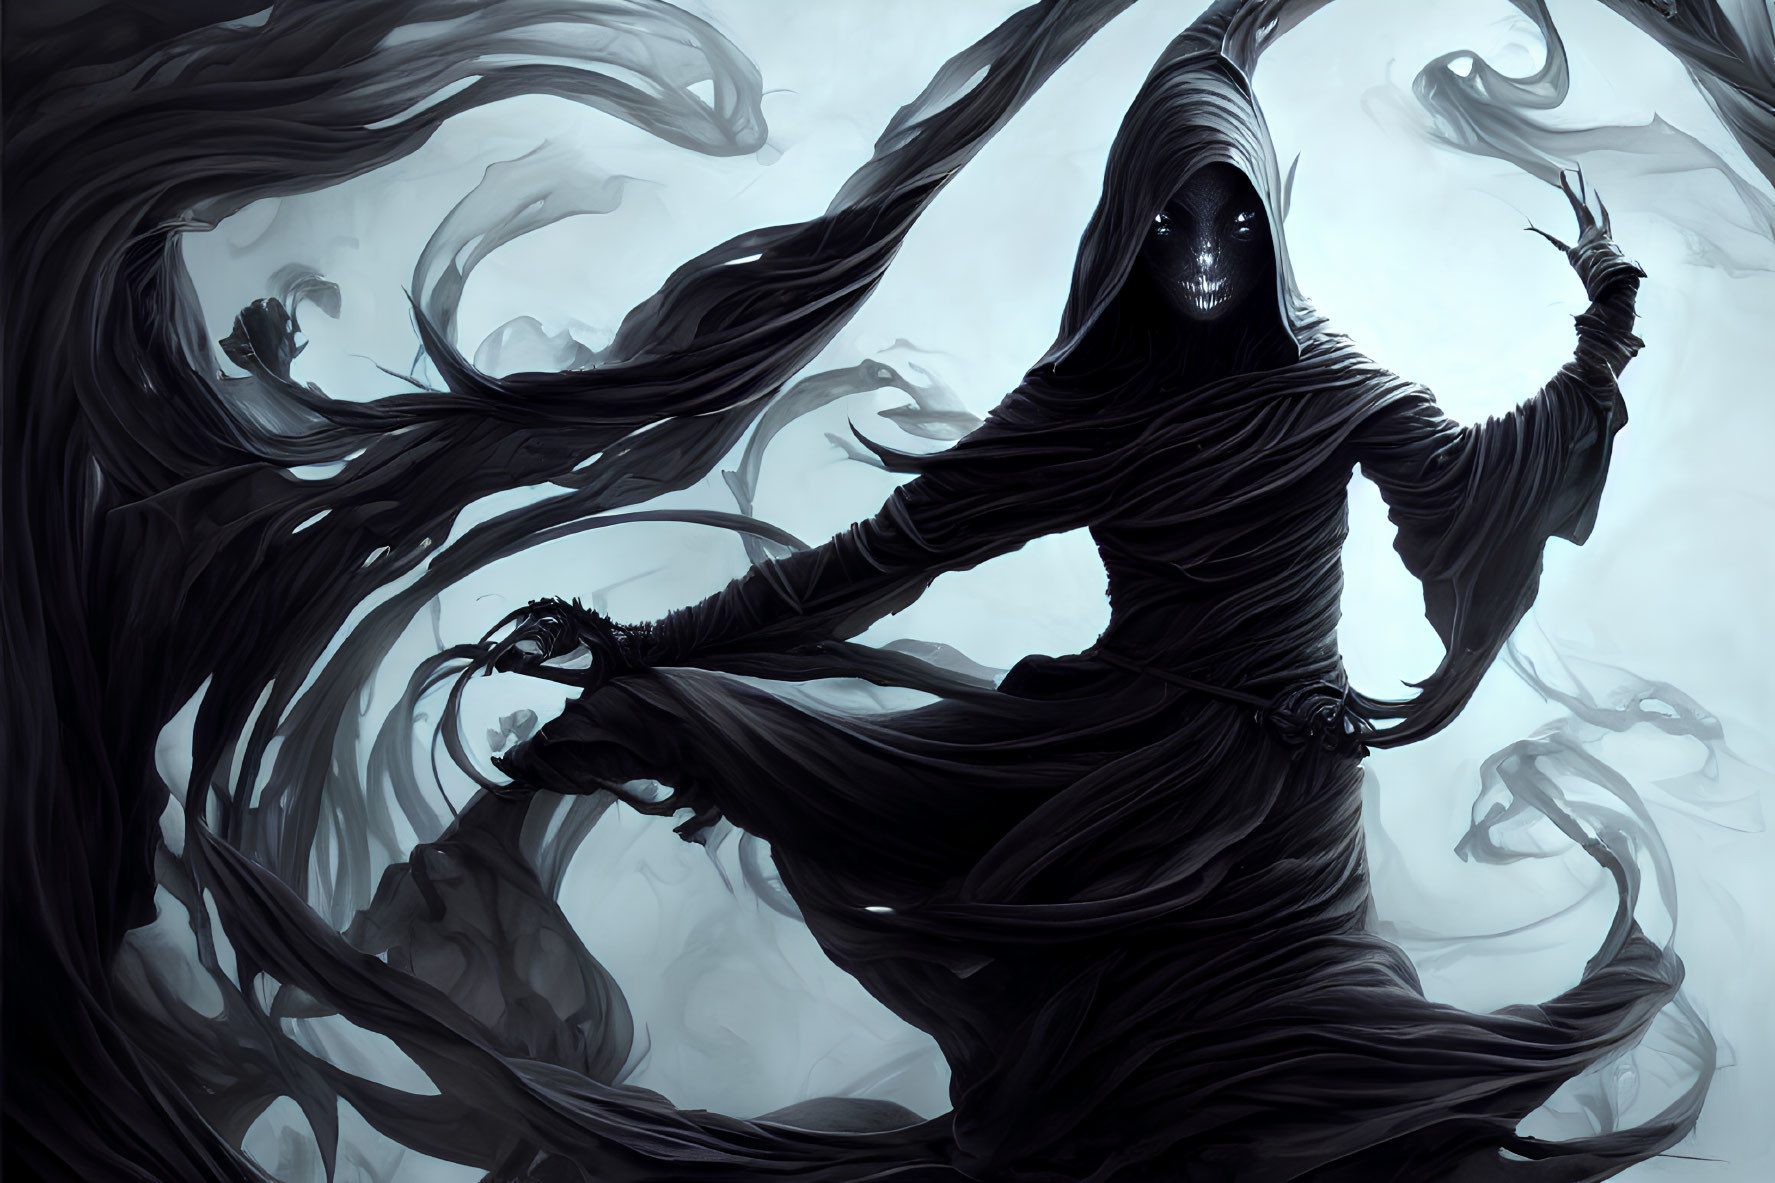 Mysterious cloaked figure with glowing eyes surrounded by dark tendrils